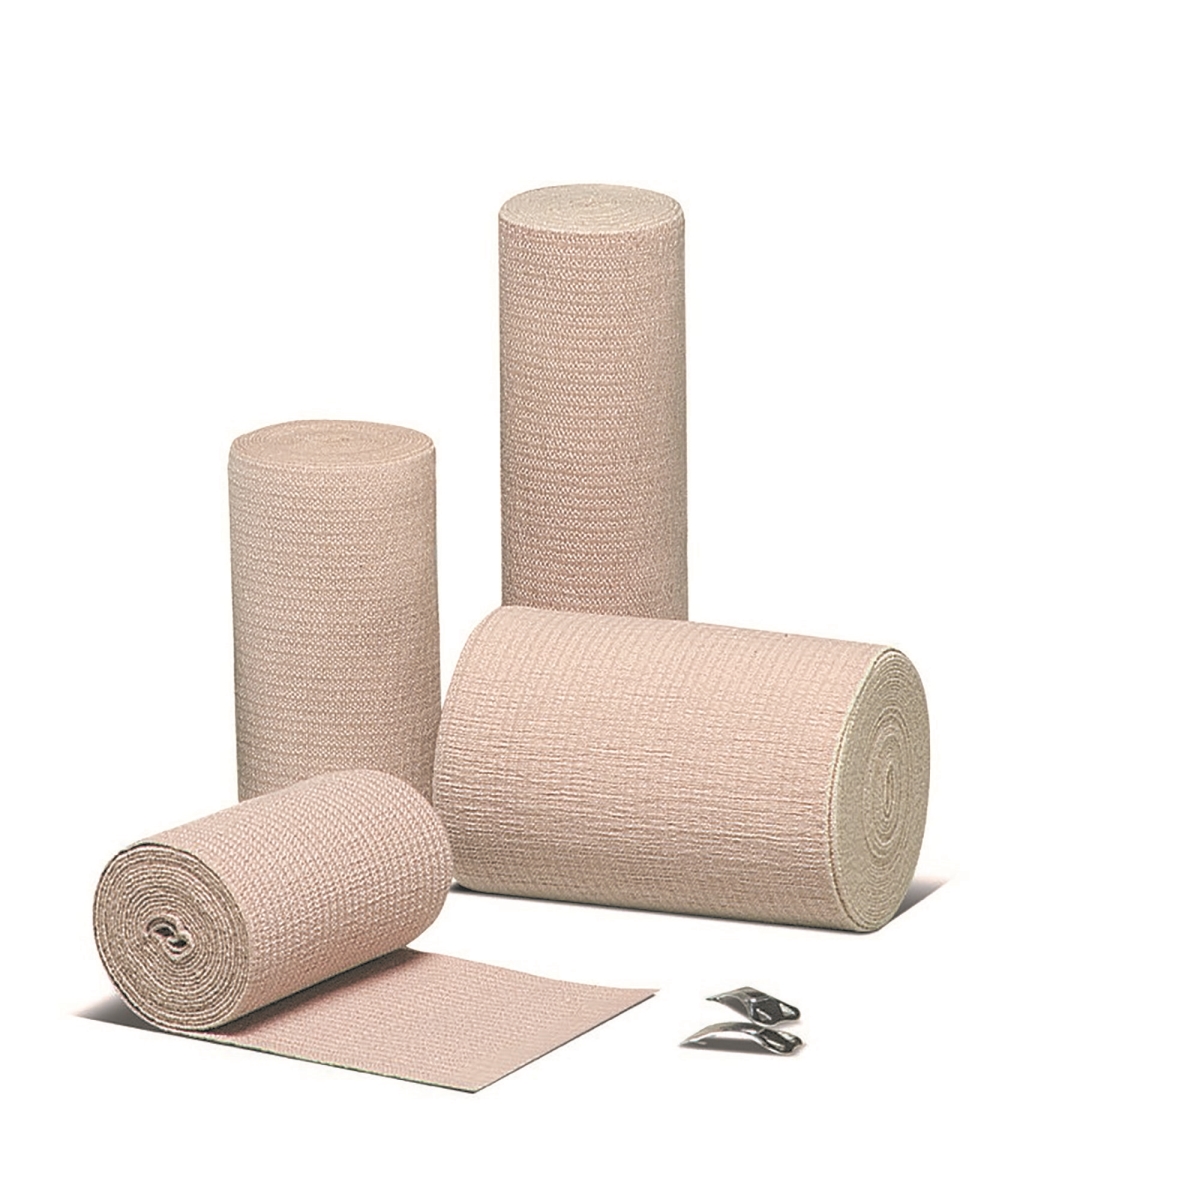 Picture of Hartmann 33202001 Tan 2 in. x 4 yards Econo-Wrap LF Non-Sterile Elastic Bandage - Pack of 10